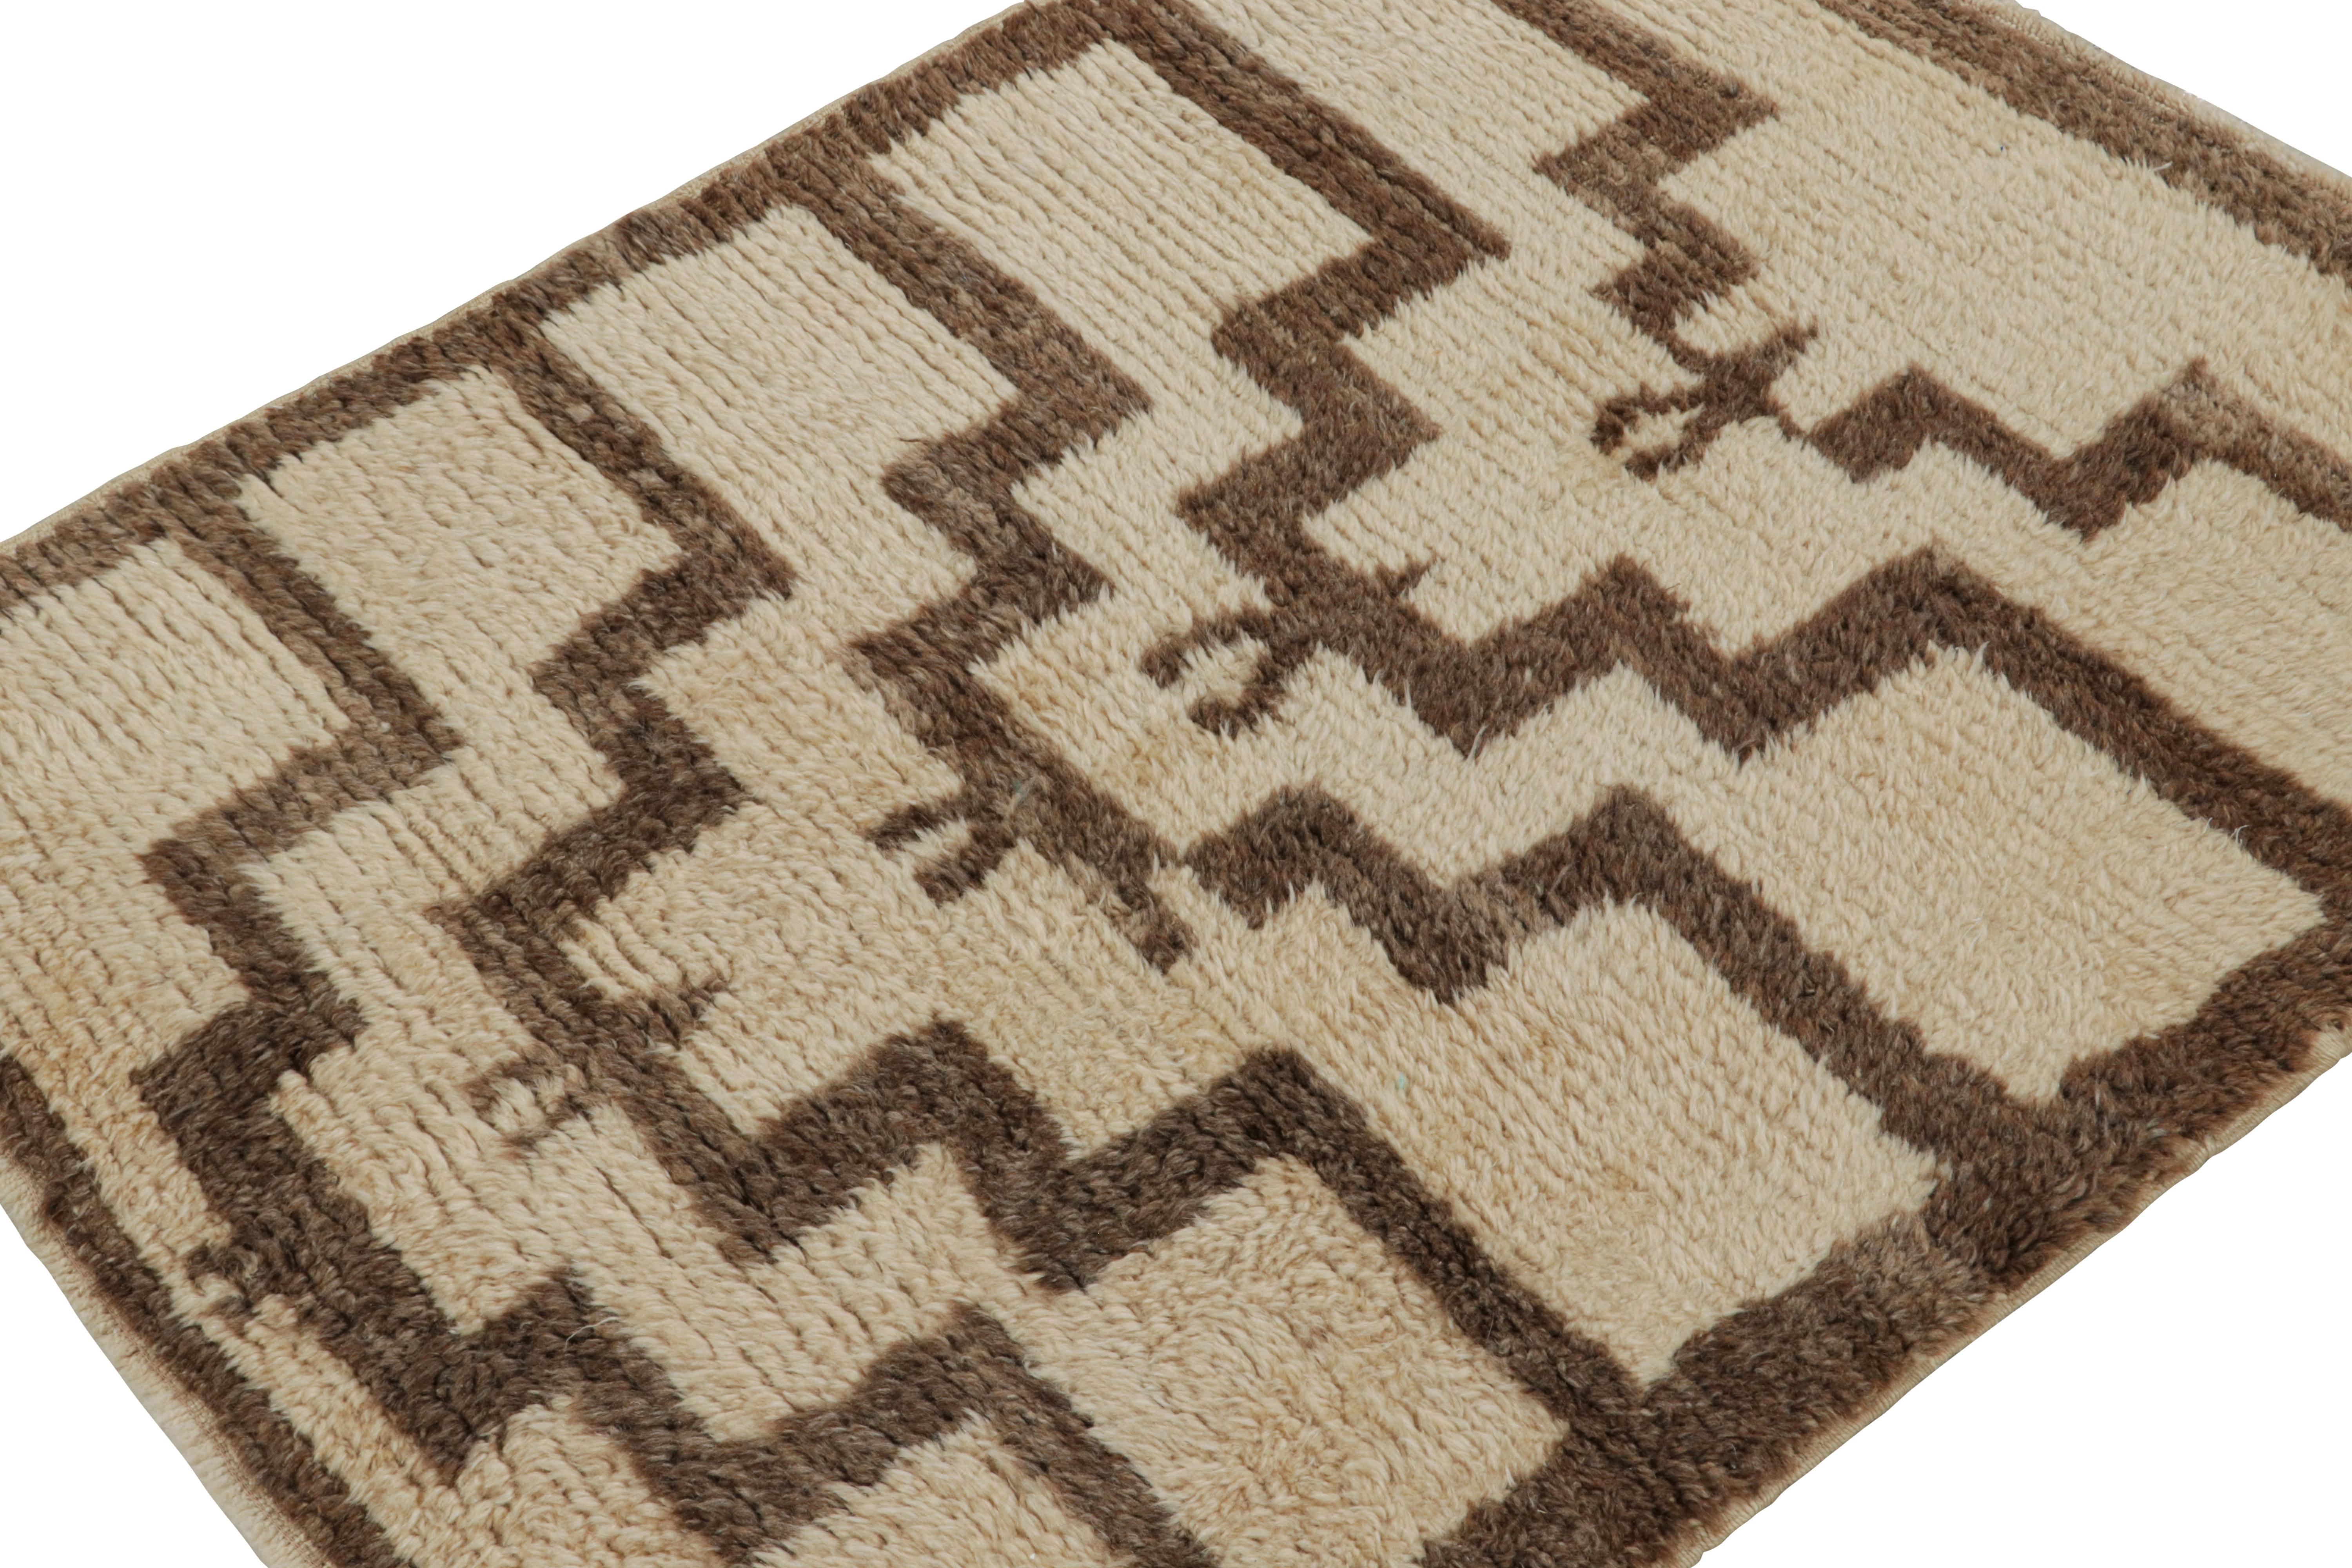 Hand-knotted in wool, this 4x4 vintage Tulu rug, circa 1950-1960, is among the family of Tulus with minimalist geometric patterns, as seen in the rich brown atop beige.  

On the design: 

Tulus are some of the most sought-after high-pile and shag